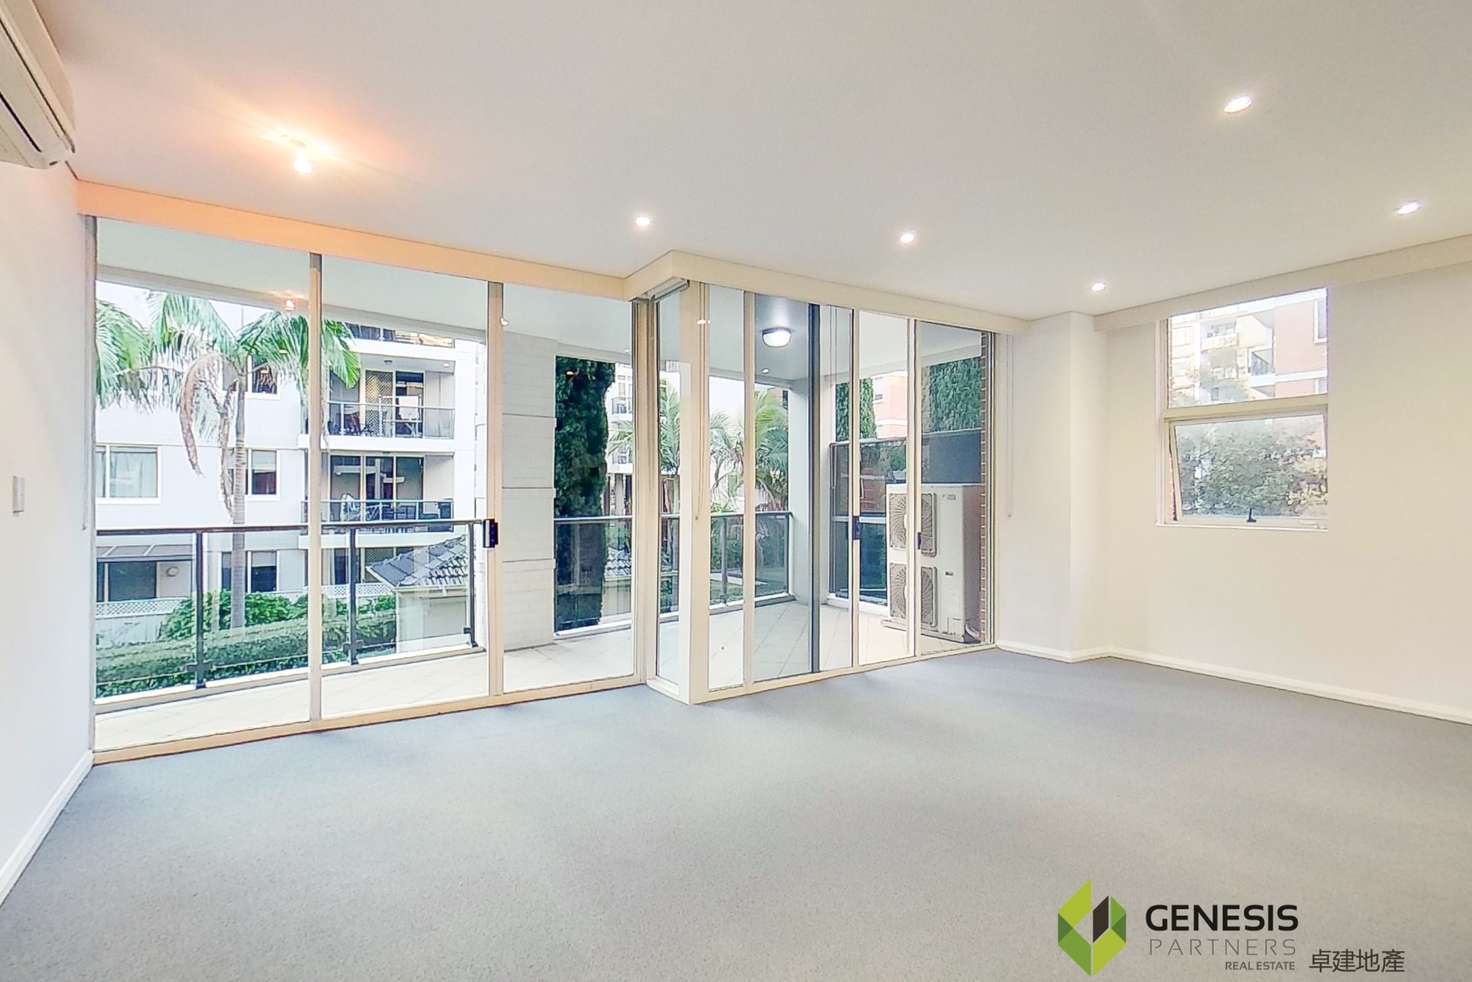 Main view of Homely apartment listing, 122/97 Bonar Street, Wolli Creek NSW 2205